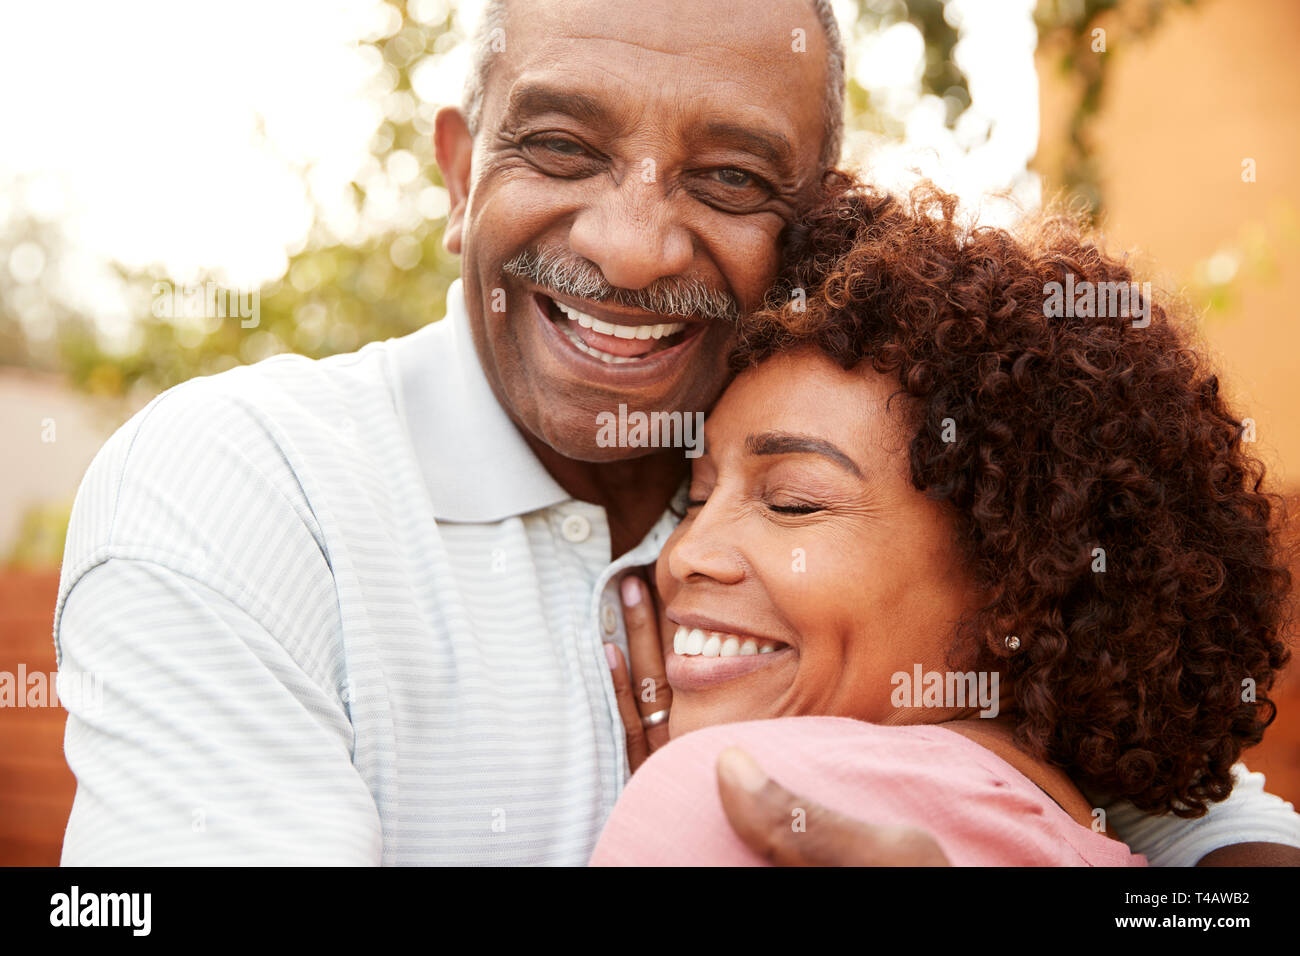 Senior black man and his middle aged daughter embracing, close up Stock Photo